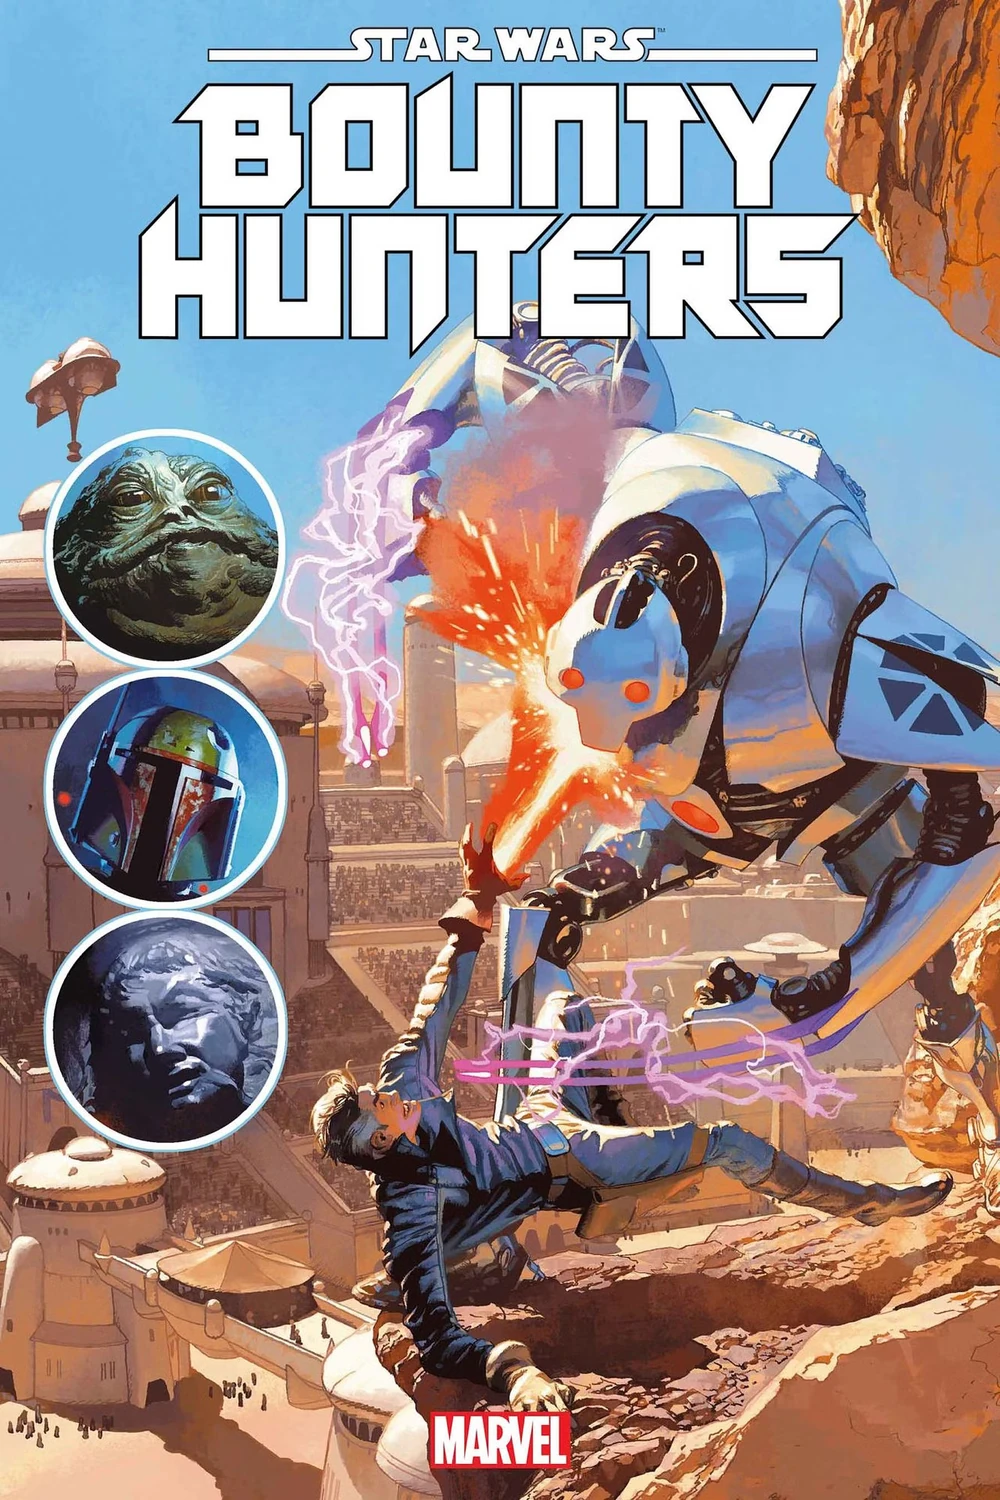 Star Wars: Bounty Hunters #42, the finale issue